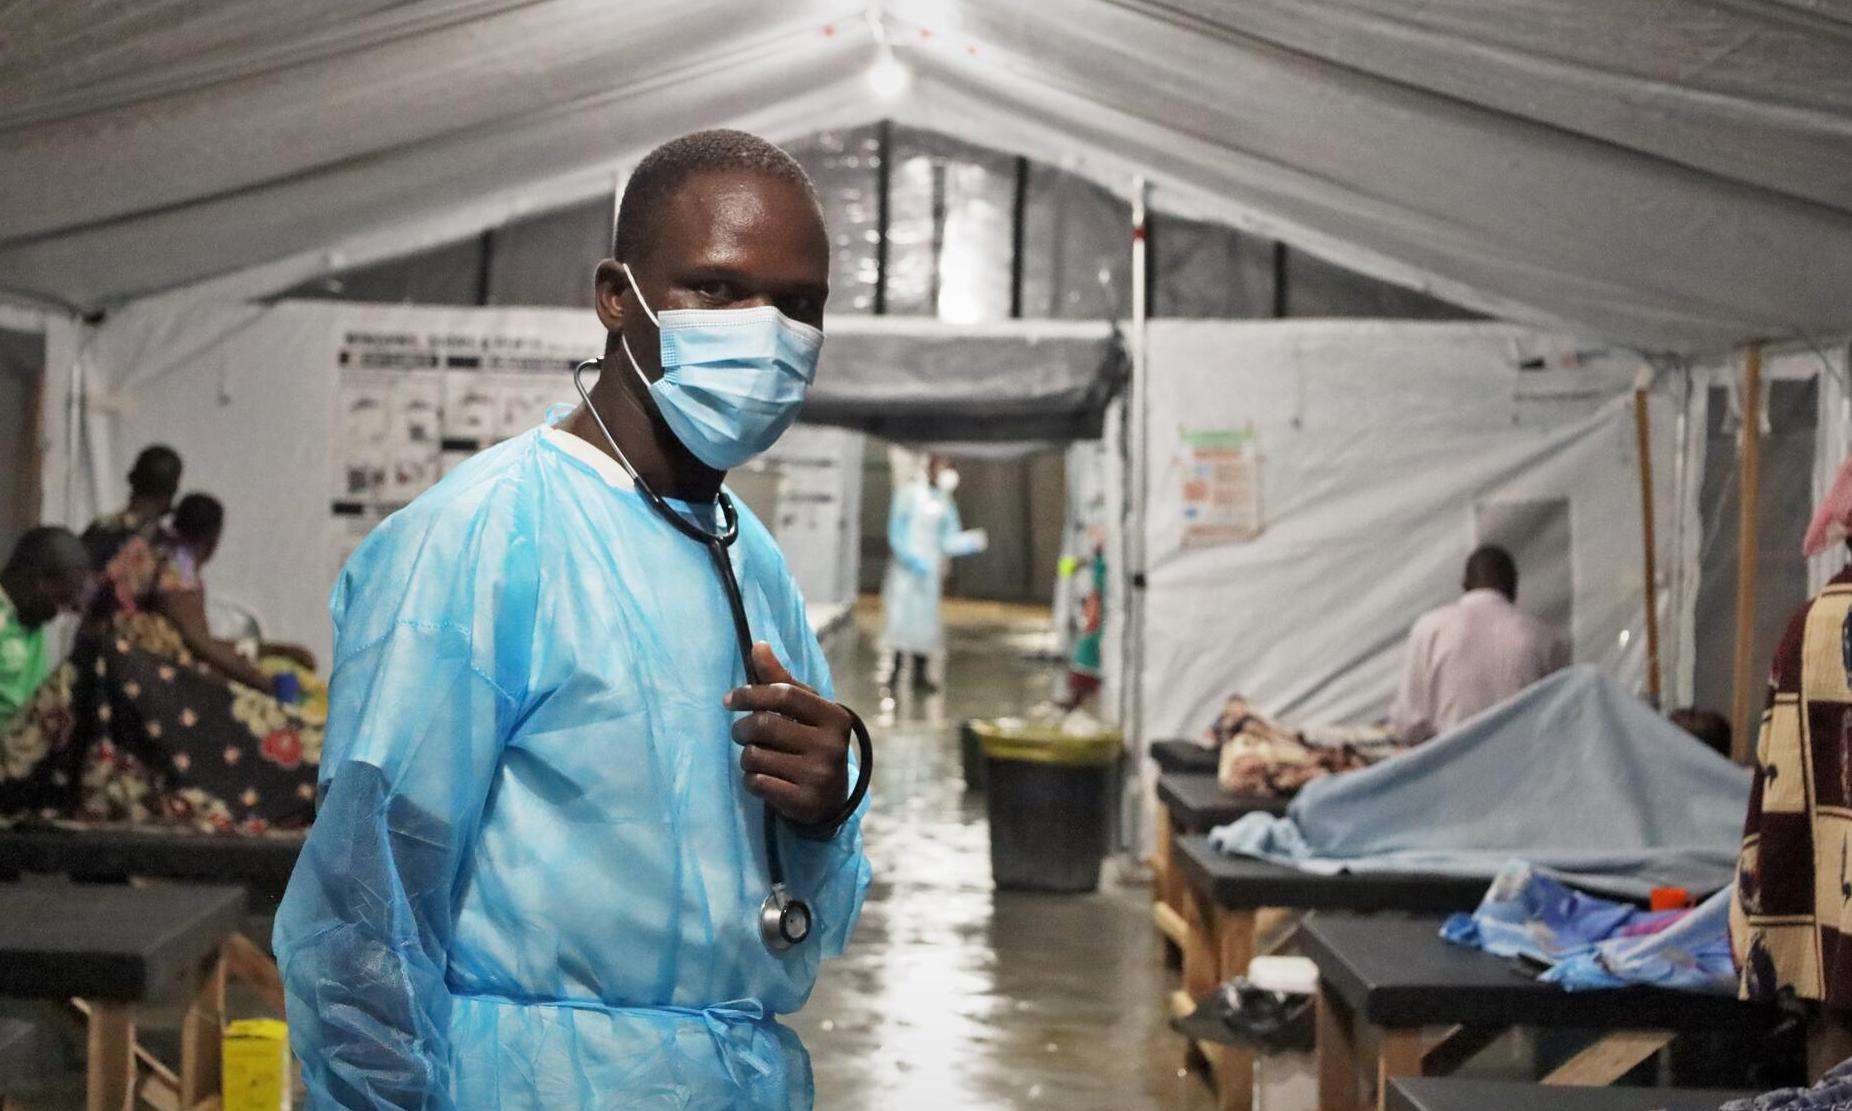 A health care worker wearing PPE in MSF's Cholera Treatment Center in Quelimane, Mozambique.